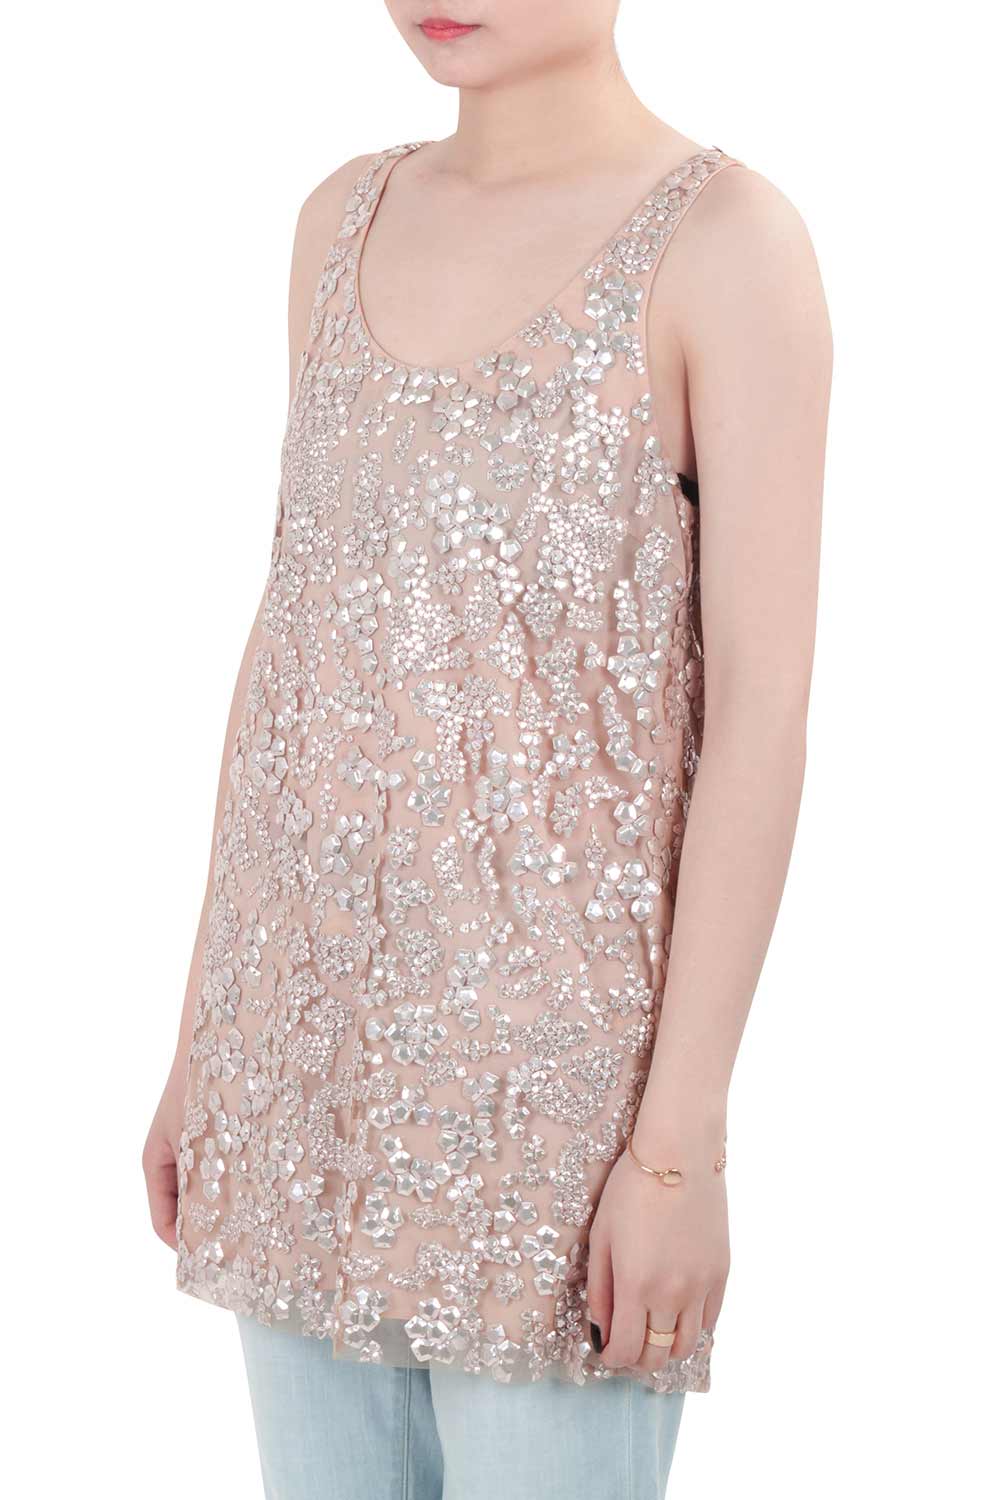 

Vera Wang Collection Blush Pink Sequin Embellished Tulle Overlay Sleeveless Top